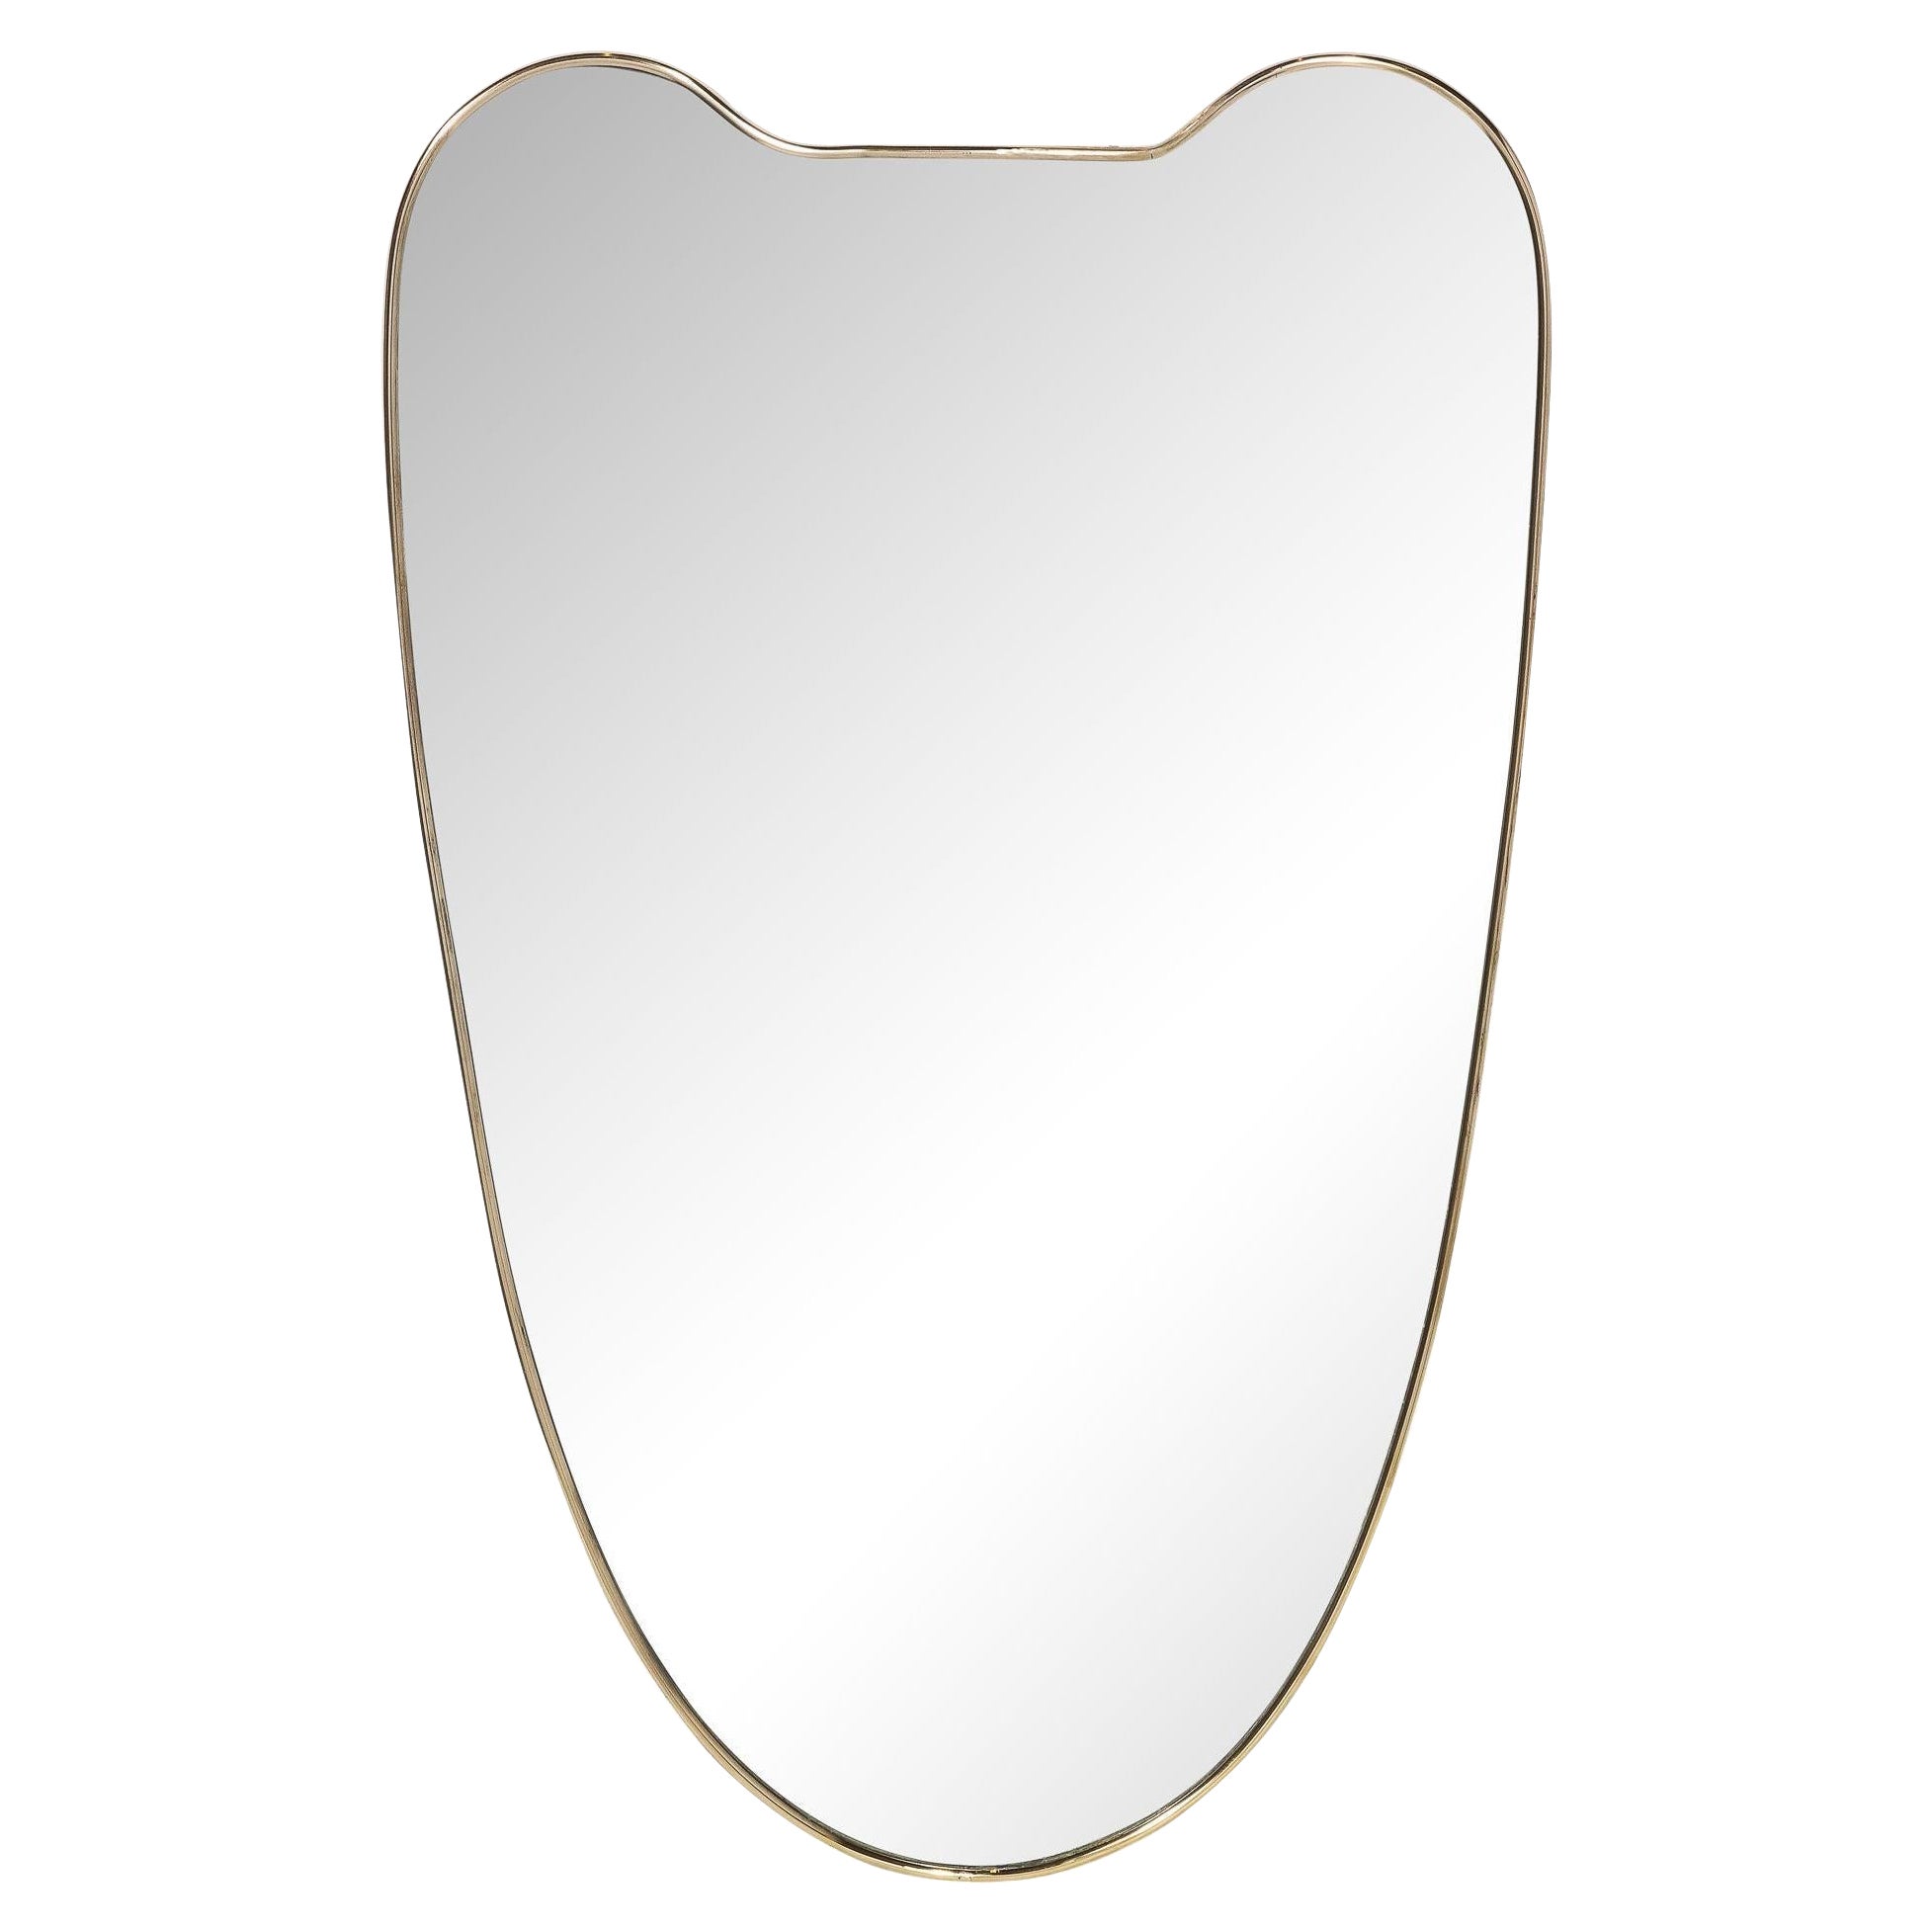 Mid-Century Modernist Brass Wrapped Shield Form Mirror